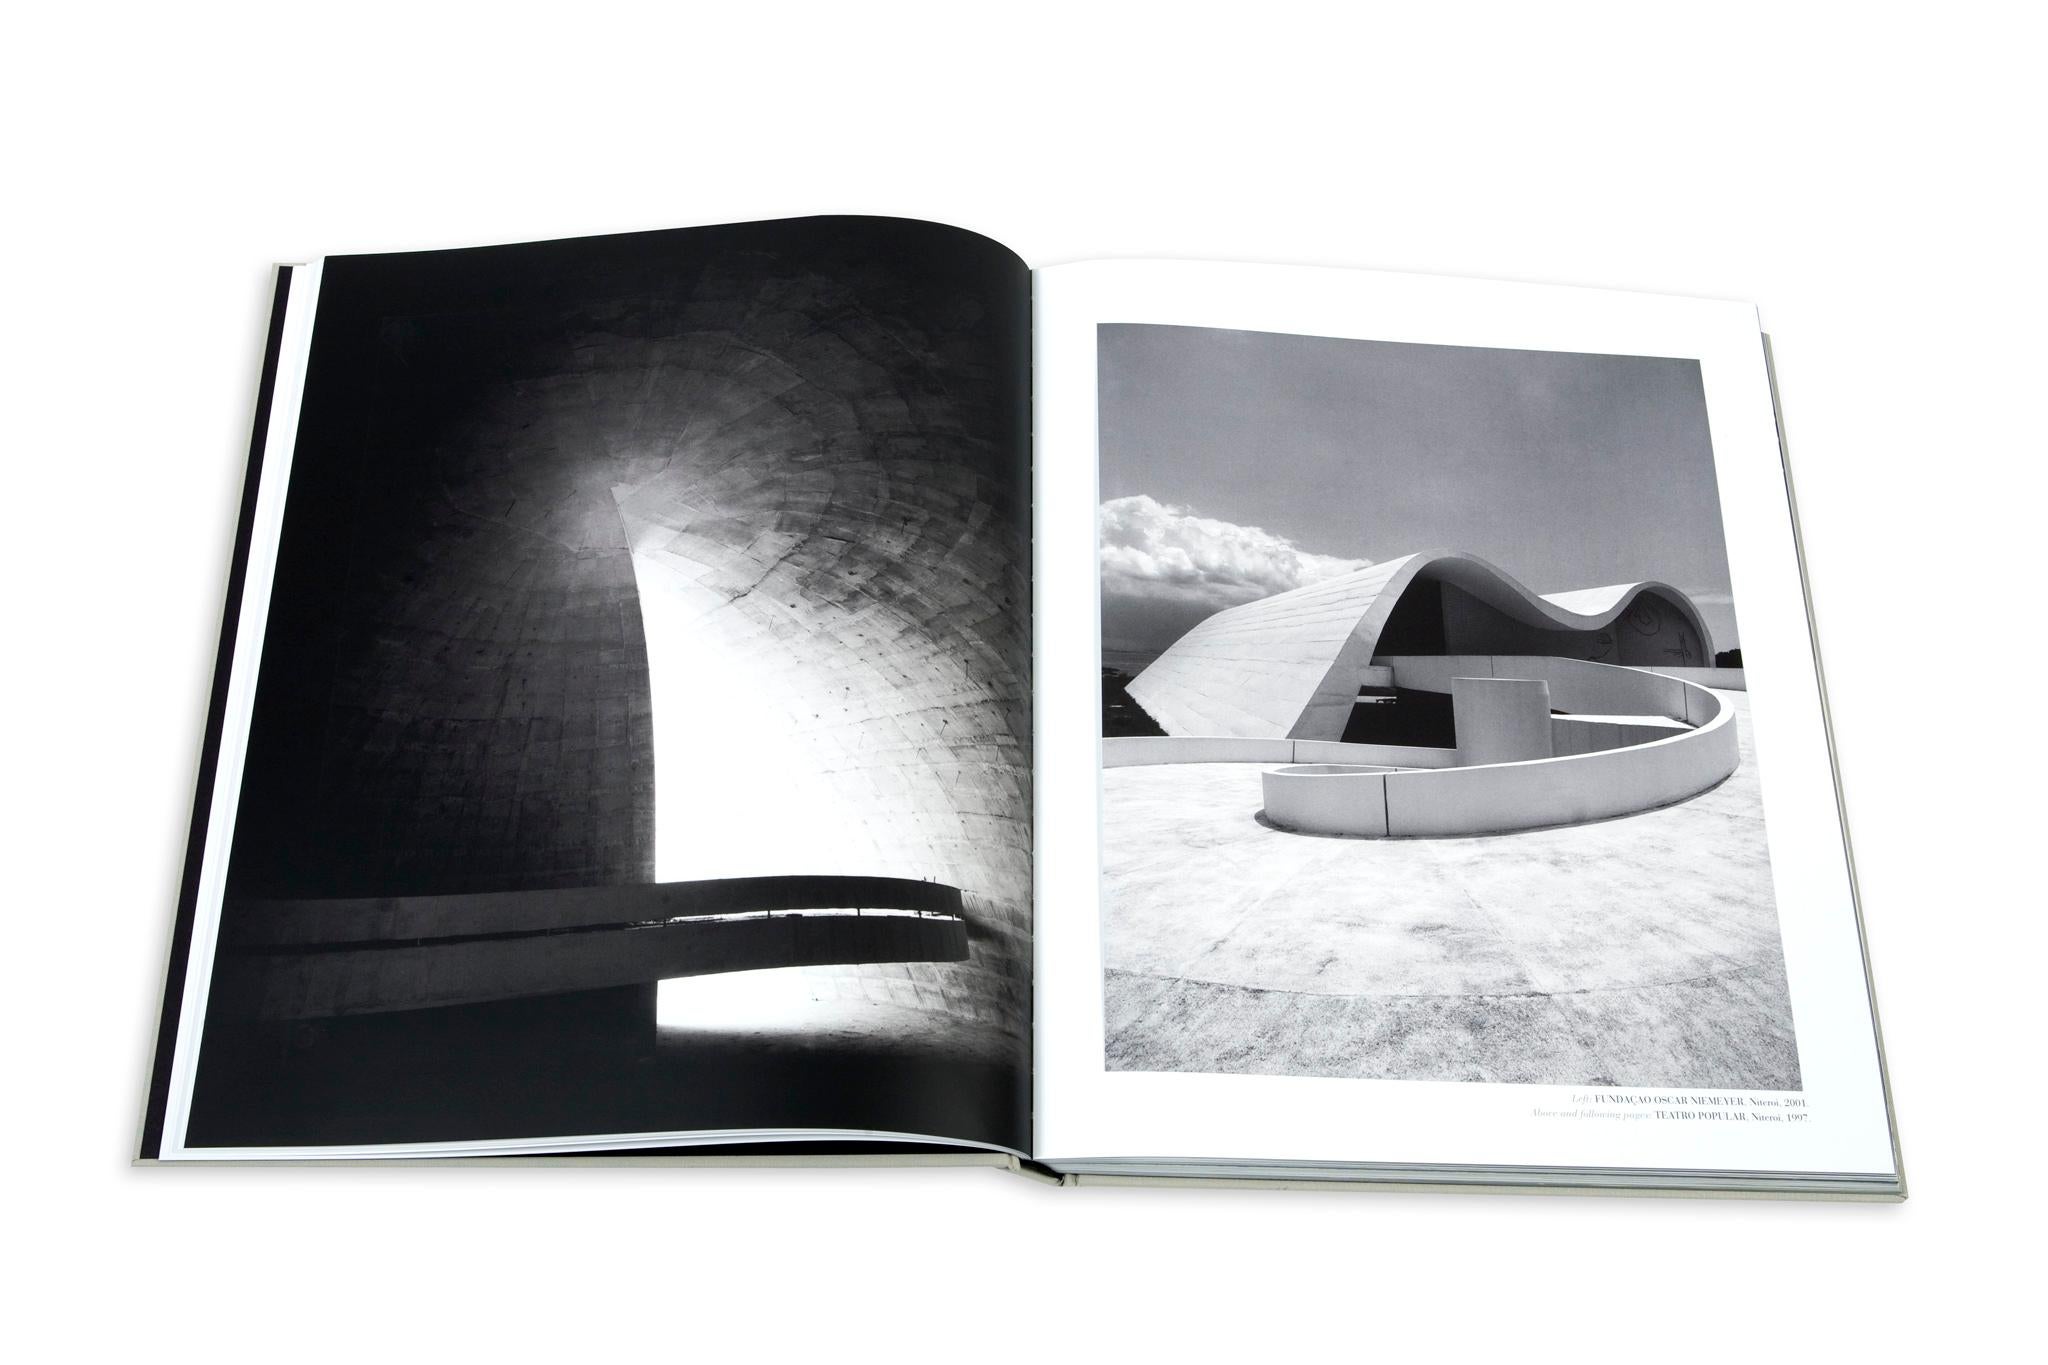 Oscar Niemeyer one of the fathers of modernist architecture, is remembered through Assouline's handmade limited-edition Ultimate Collection volume. One of the most considerable influences on 20th and 21st century architecture, Niemeyer’s legacy is